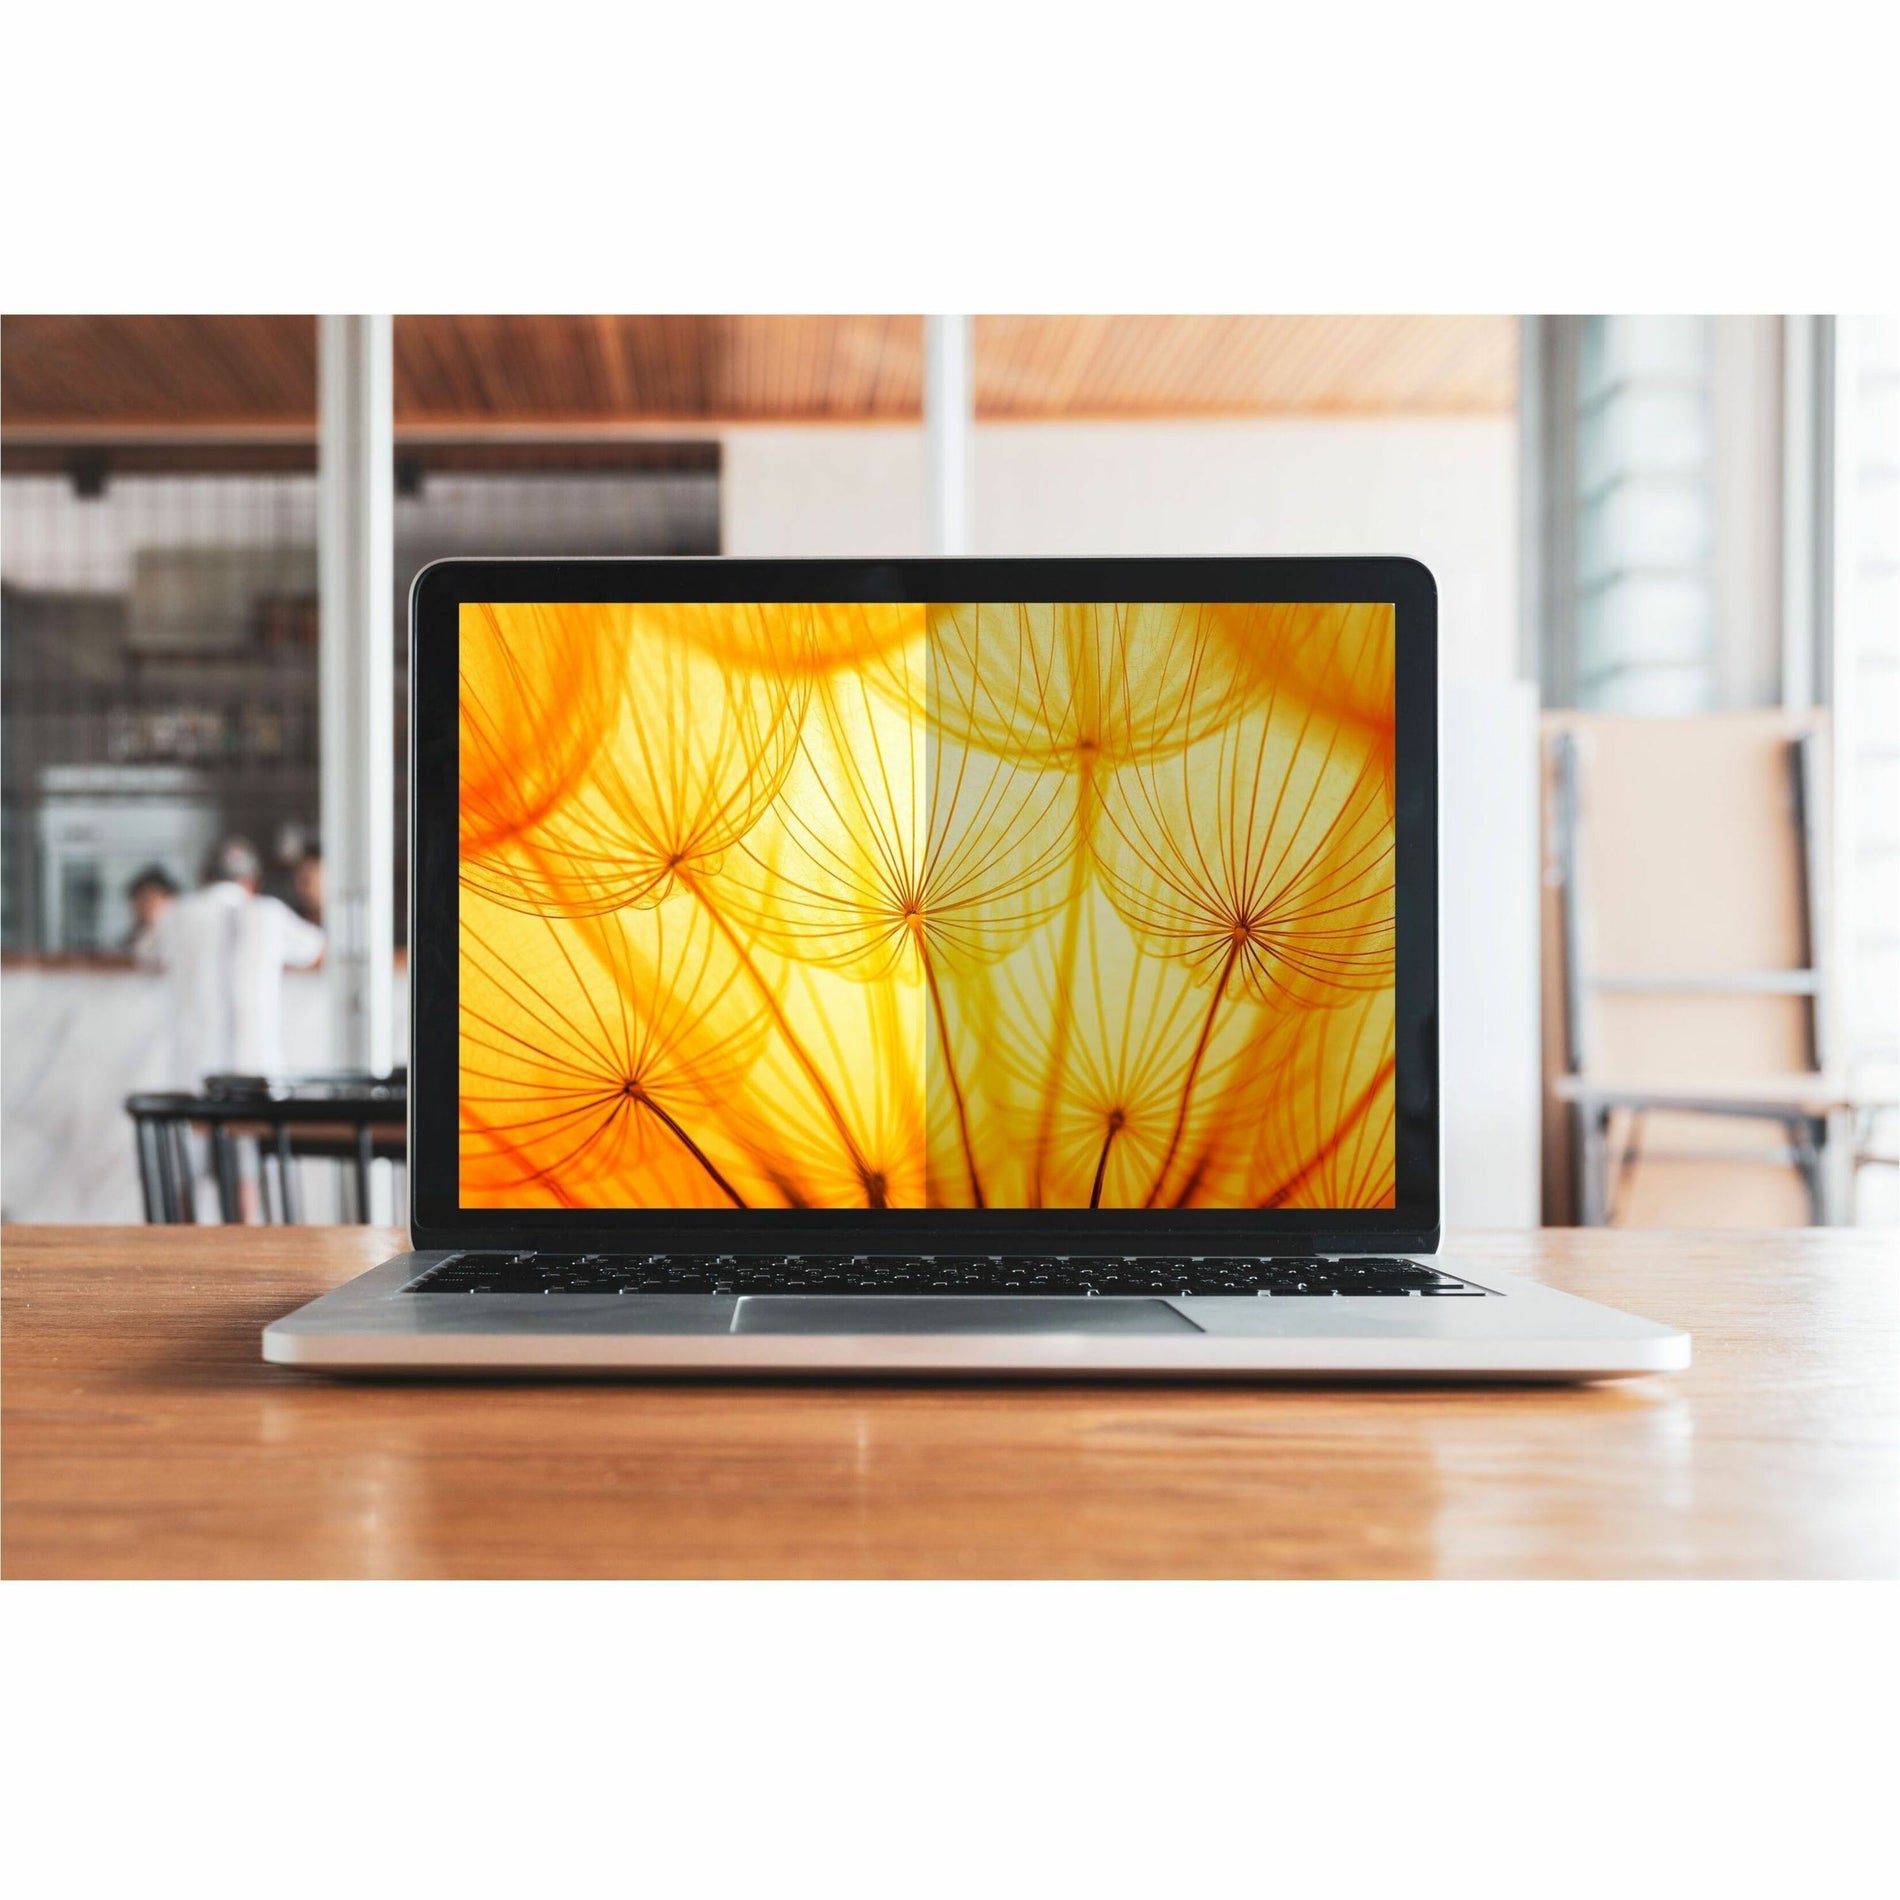 3M BPNAP003 Bright Screen Privacy Filter for Apple MacBook Pro 14 2021, 16:10